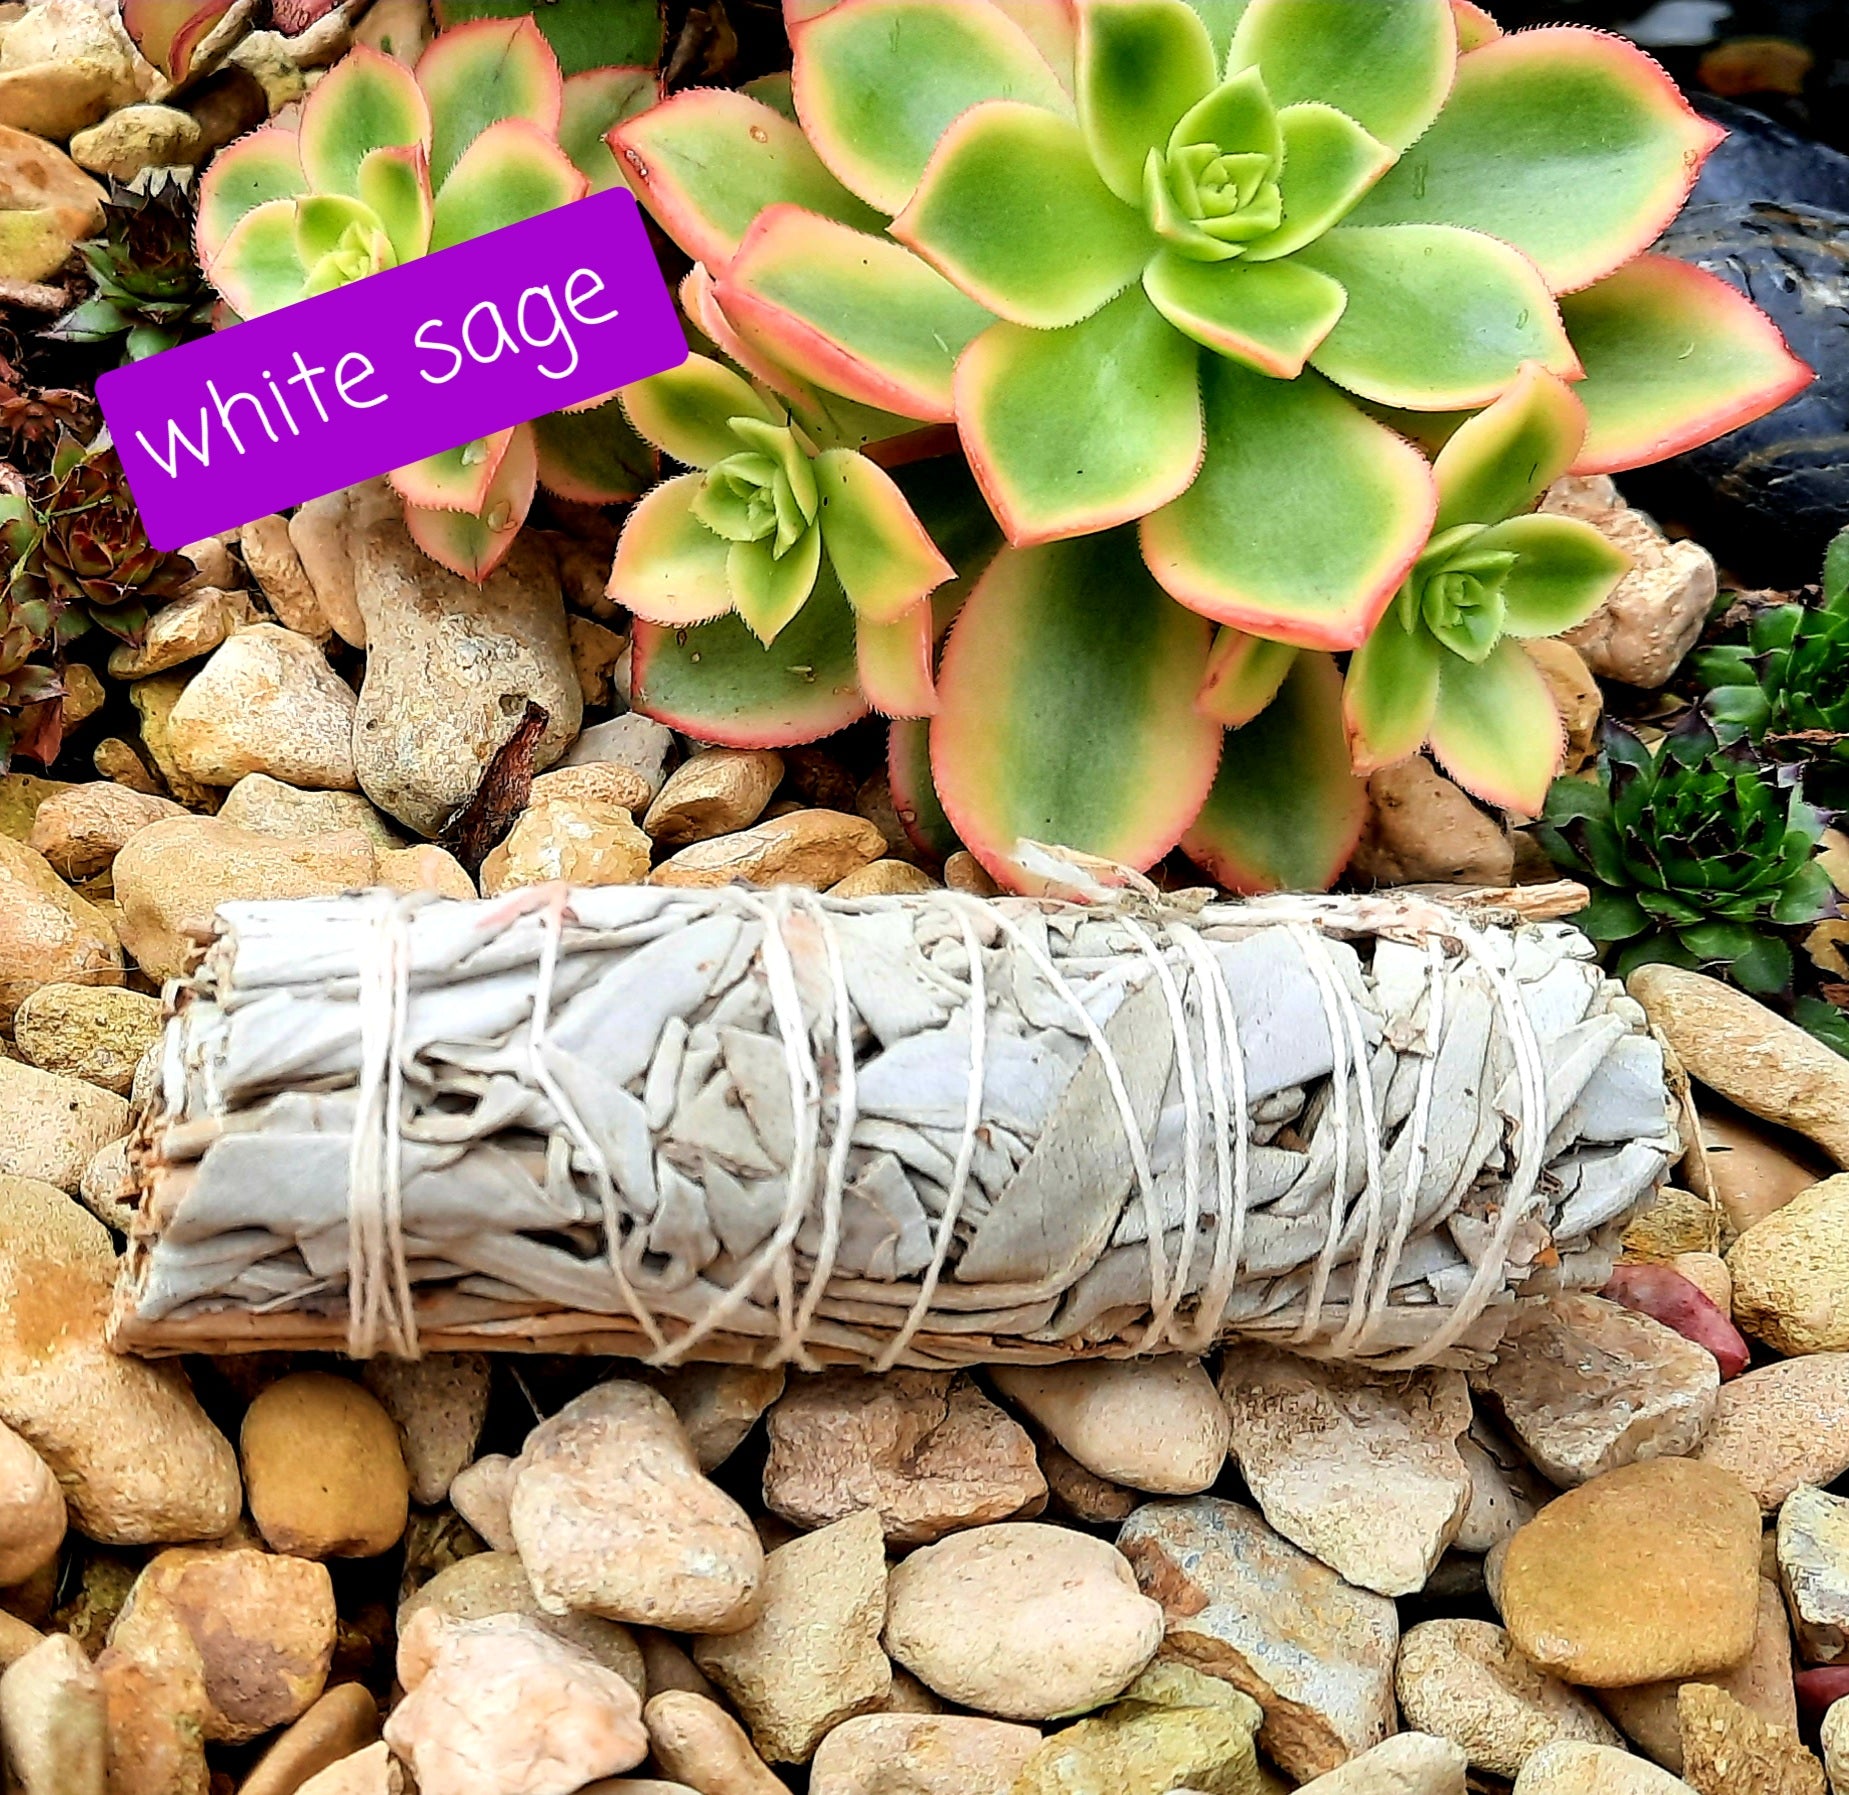 White sage smudging stick with lavender, cinnamon, rosemary, peppermint, rose petals